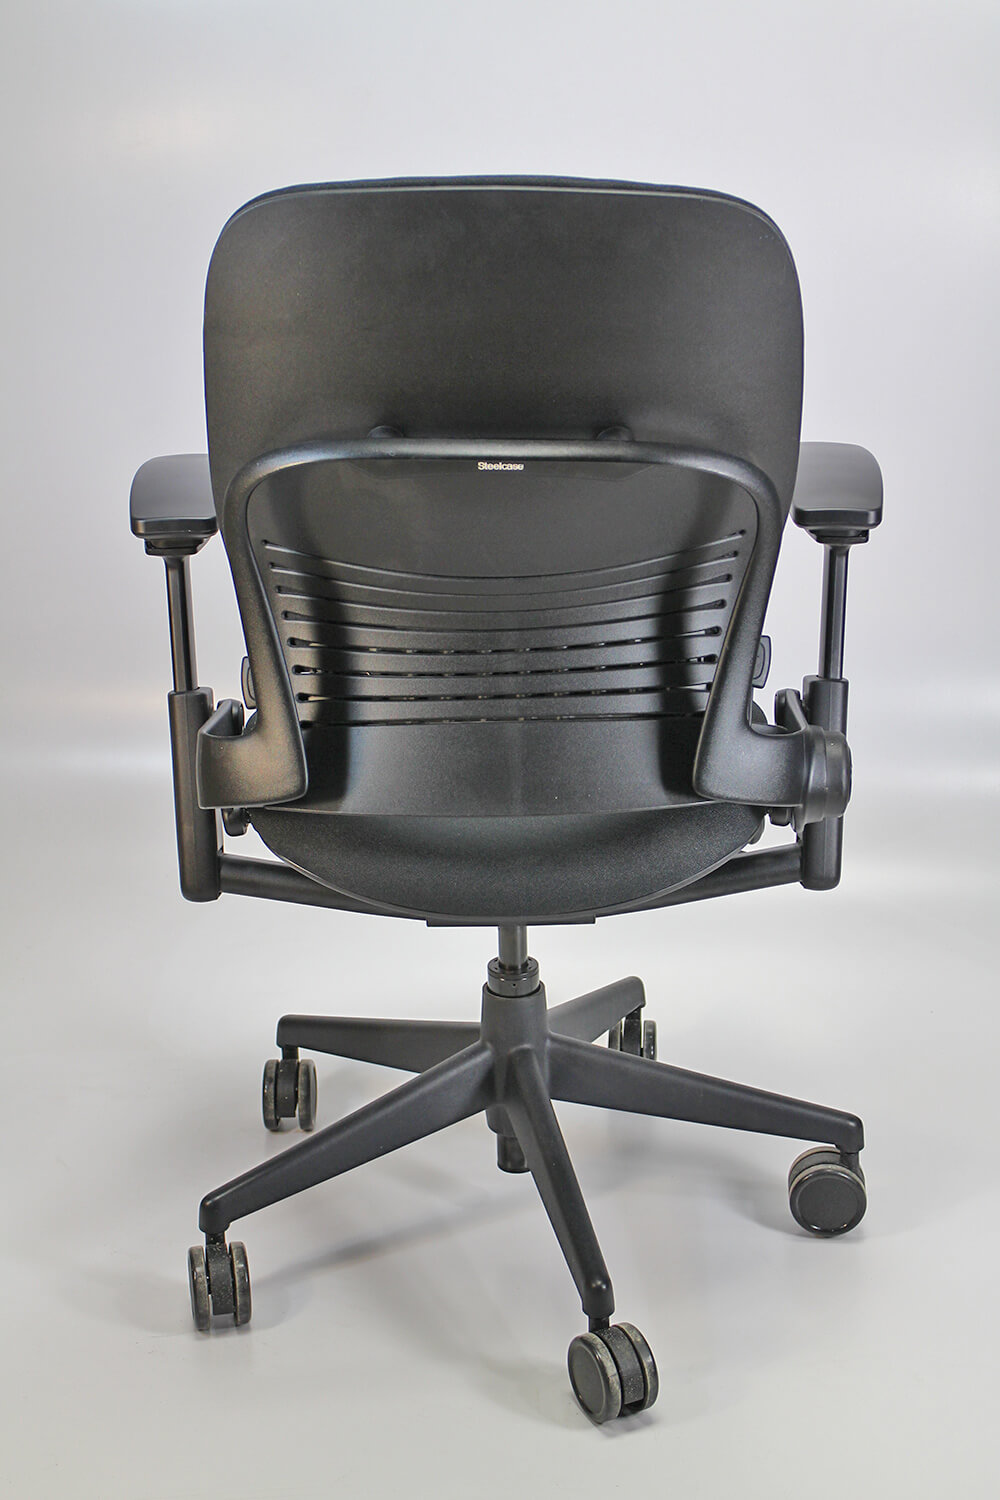 Steelcase leap v2 back view